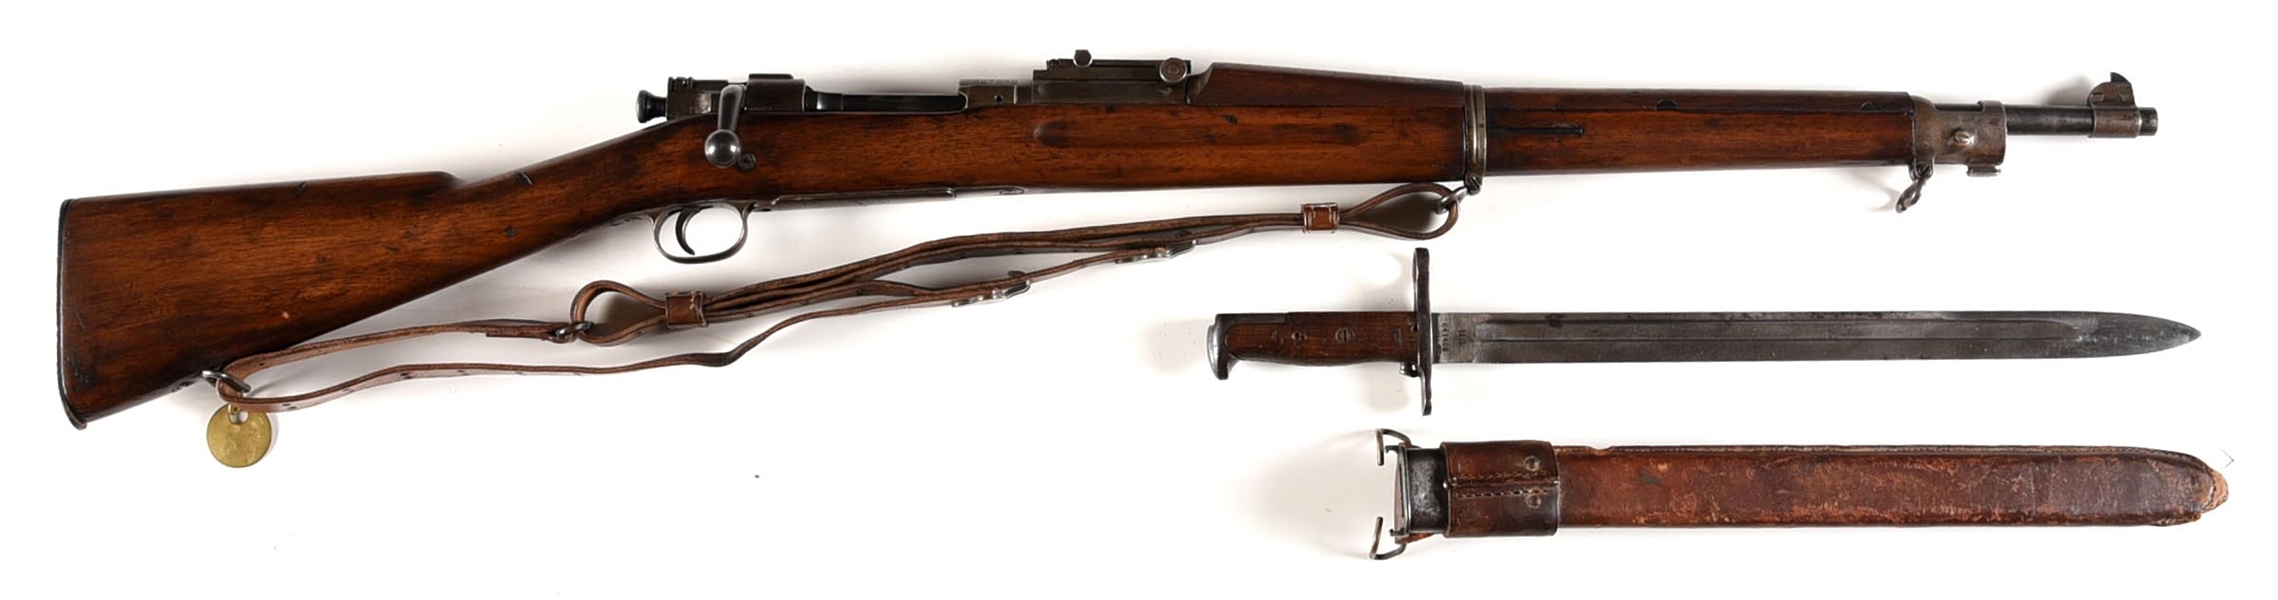 (C) US SPRINGFIELD MODEL 1903 BOLT ACTION RIFLE WITH BAYONET.